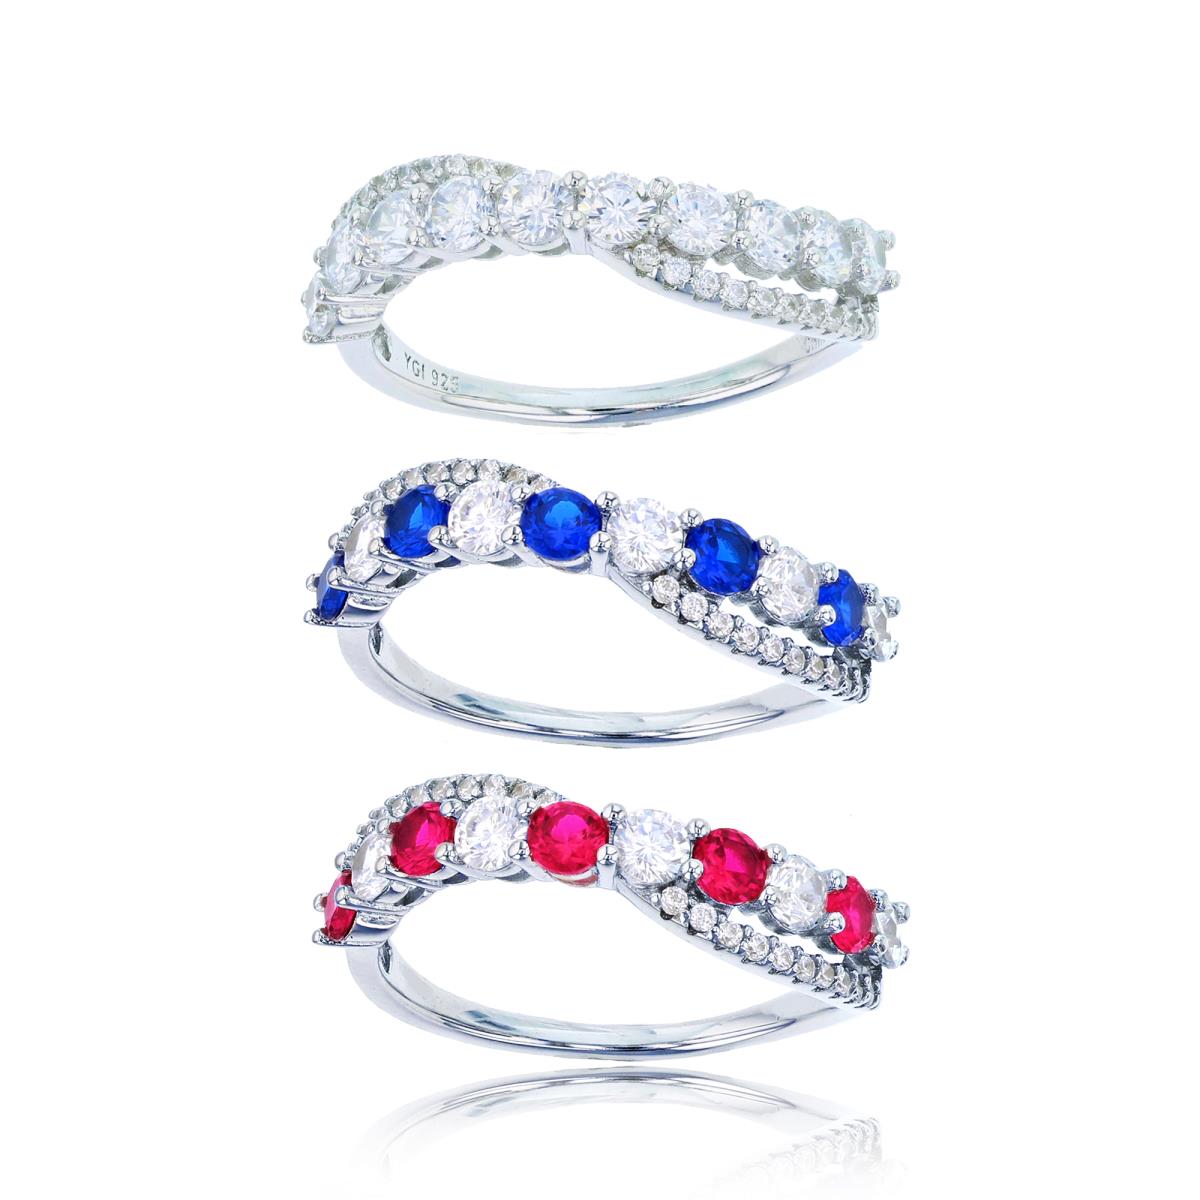 Sterling Silver Rhodium Rnd White,Blue Spinel & Ruby CZ Criss/Cross Band Set Of 3 Rings